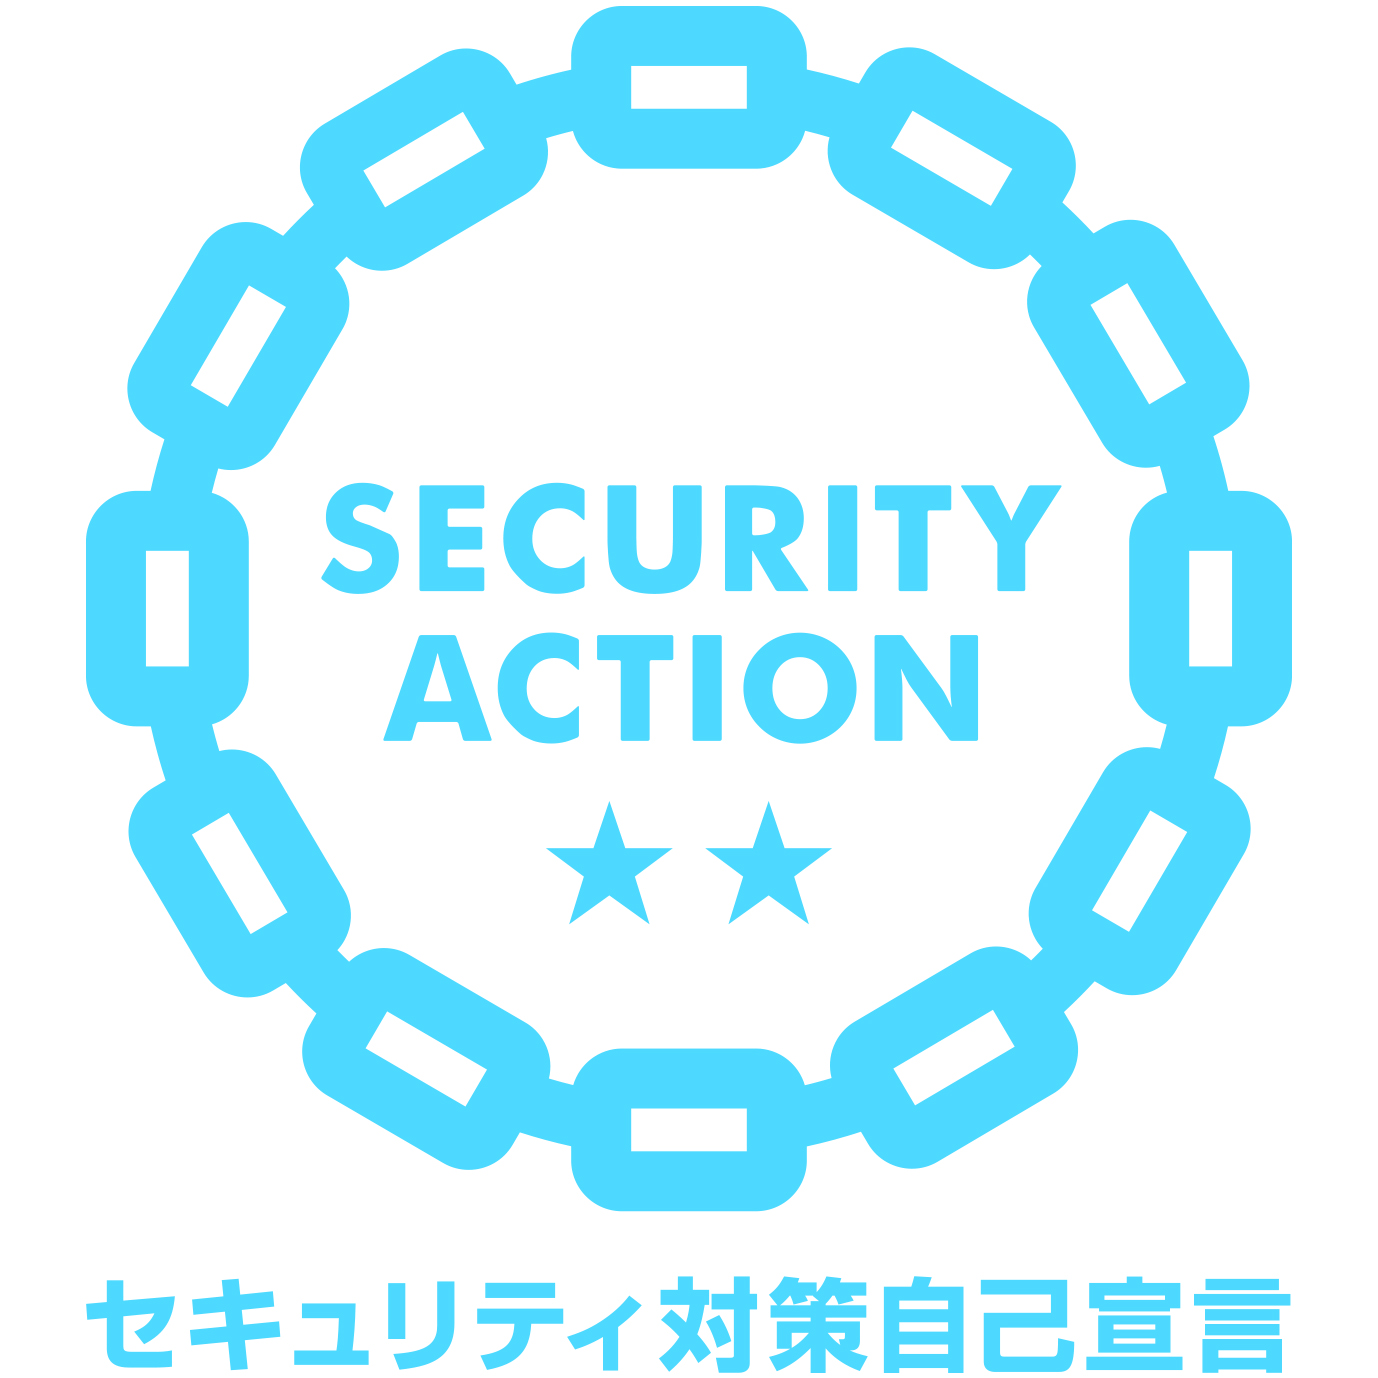 SECURITY ACTION 2 mark